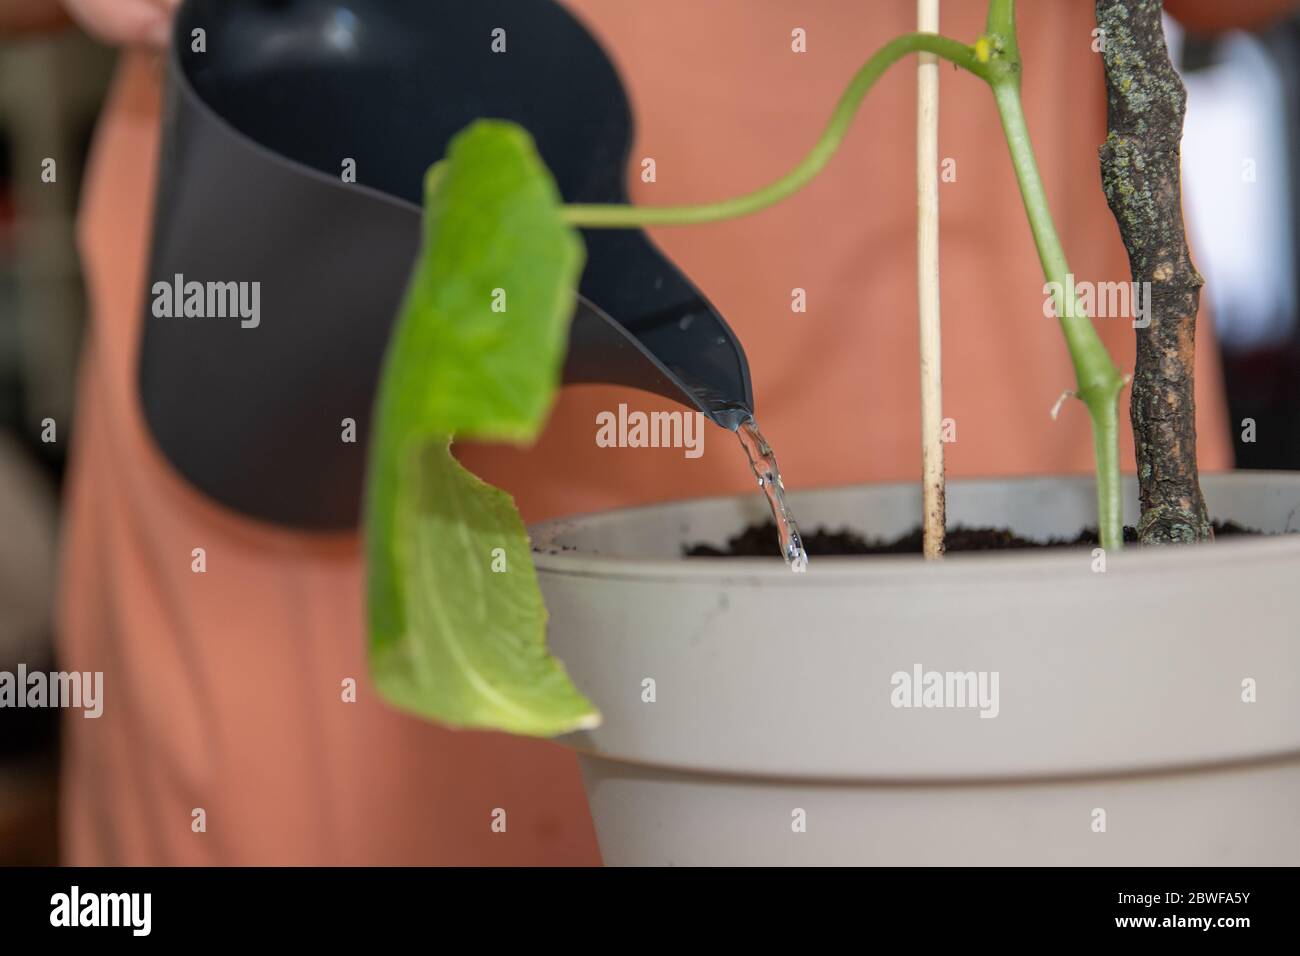 Watering cucumber plant in a pot Stock Photo